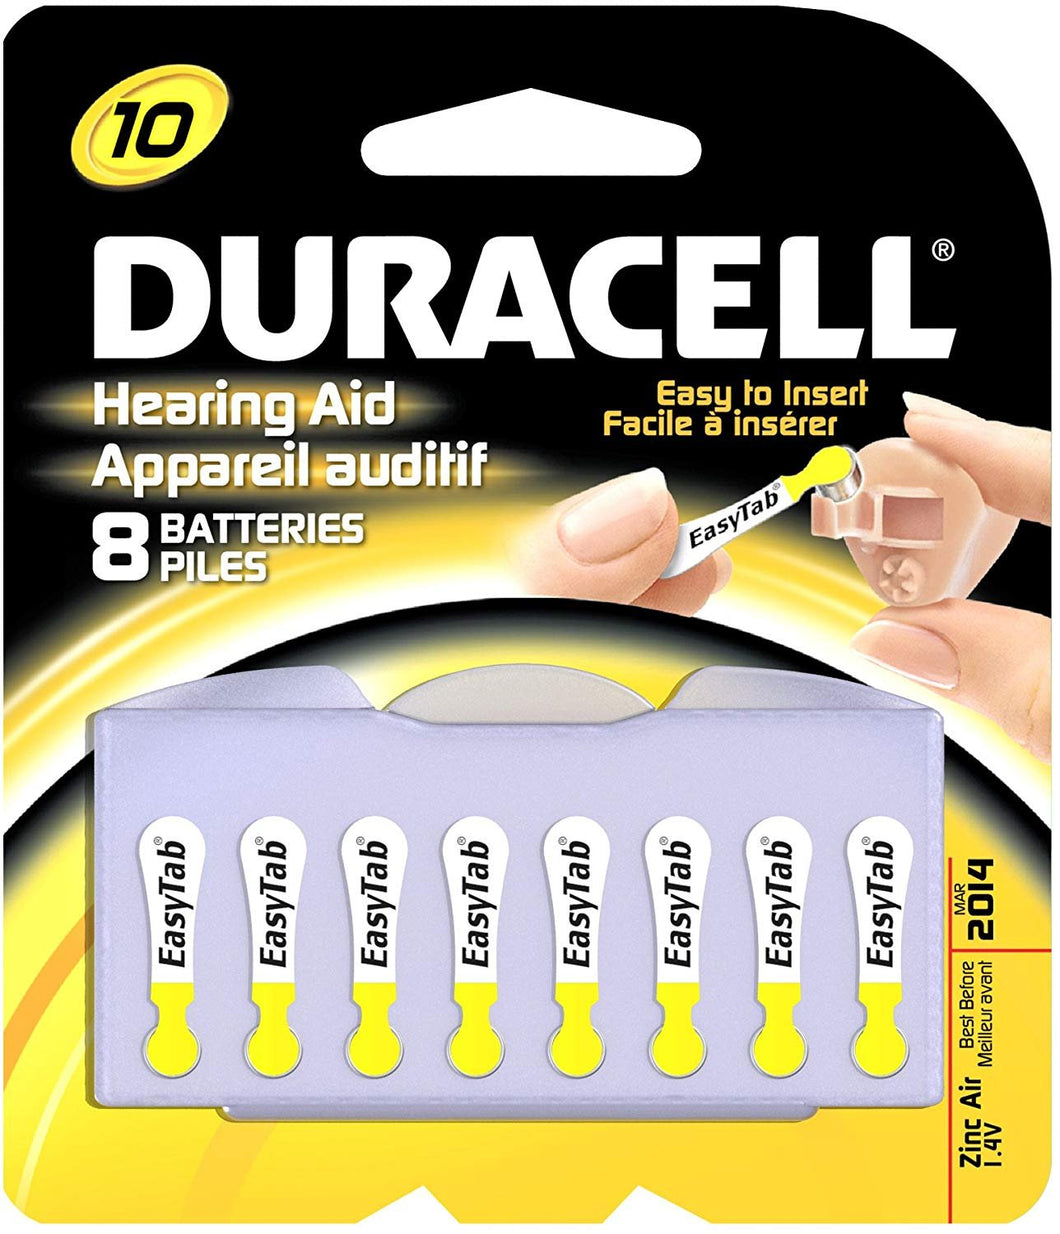 Duracell Hearing Aid 10 Batteries, 8-Count